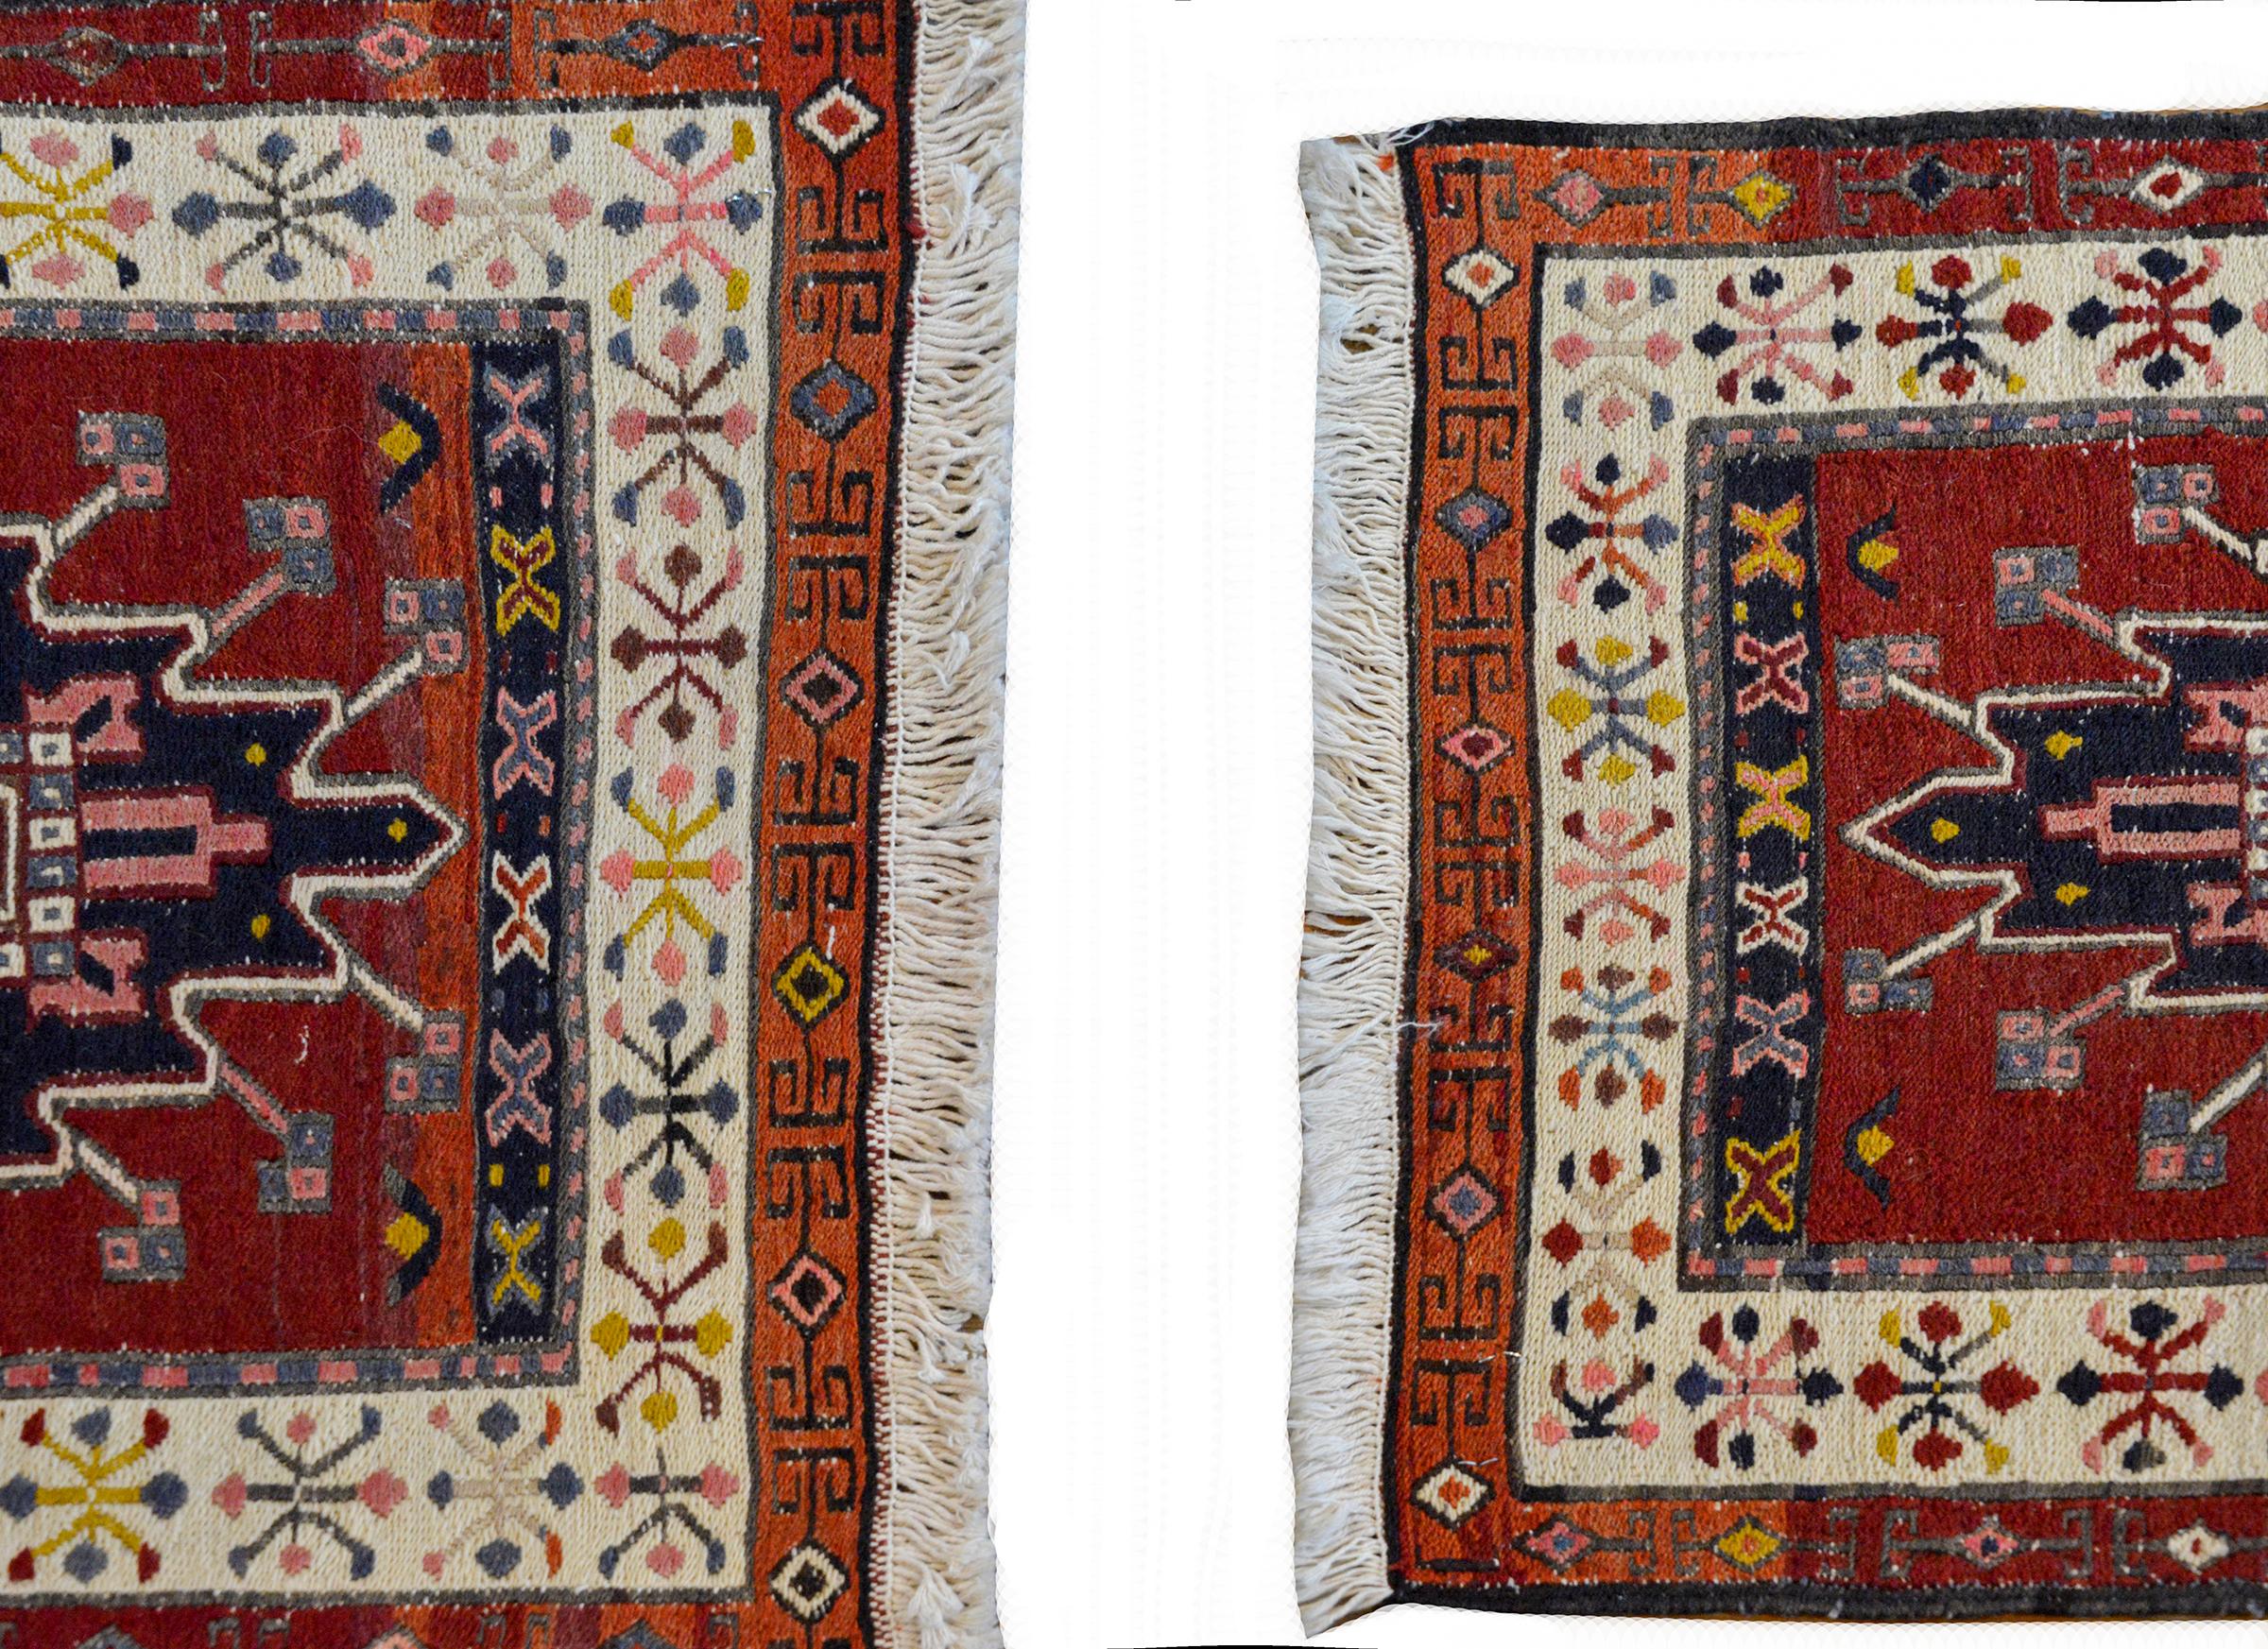 A wonderful sweet pair of early 20th century Persian Bakhtiari bag face rugs, each with a geometric pattern. Please note the rugs are different sizes.

Measures: Smaller: 20in. W x 22. in L
Larger: 21 in. W x 22 in. L.